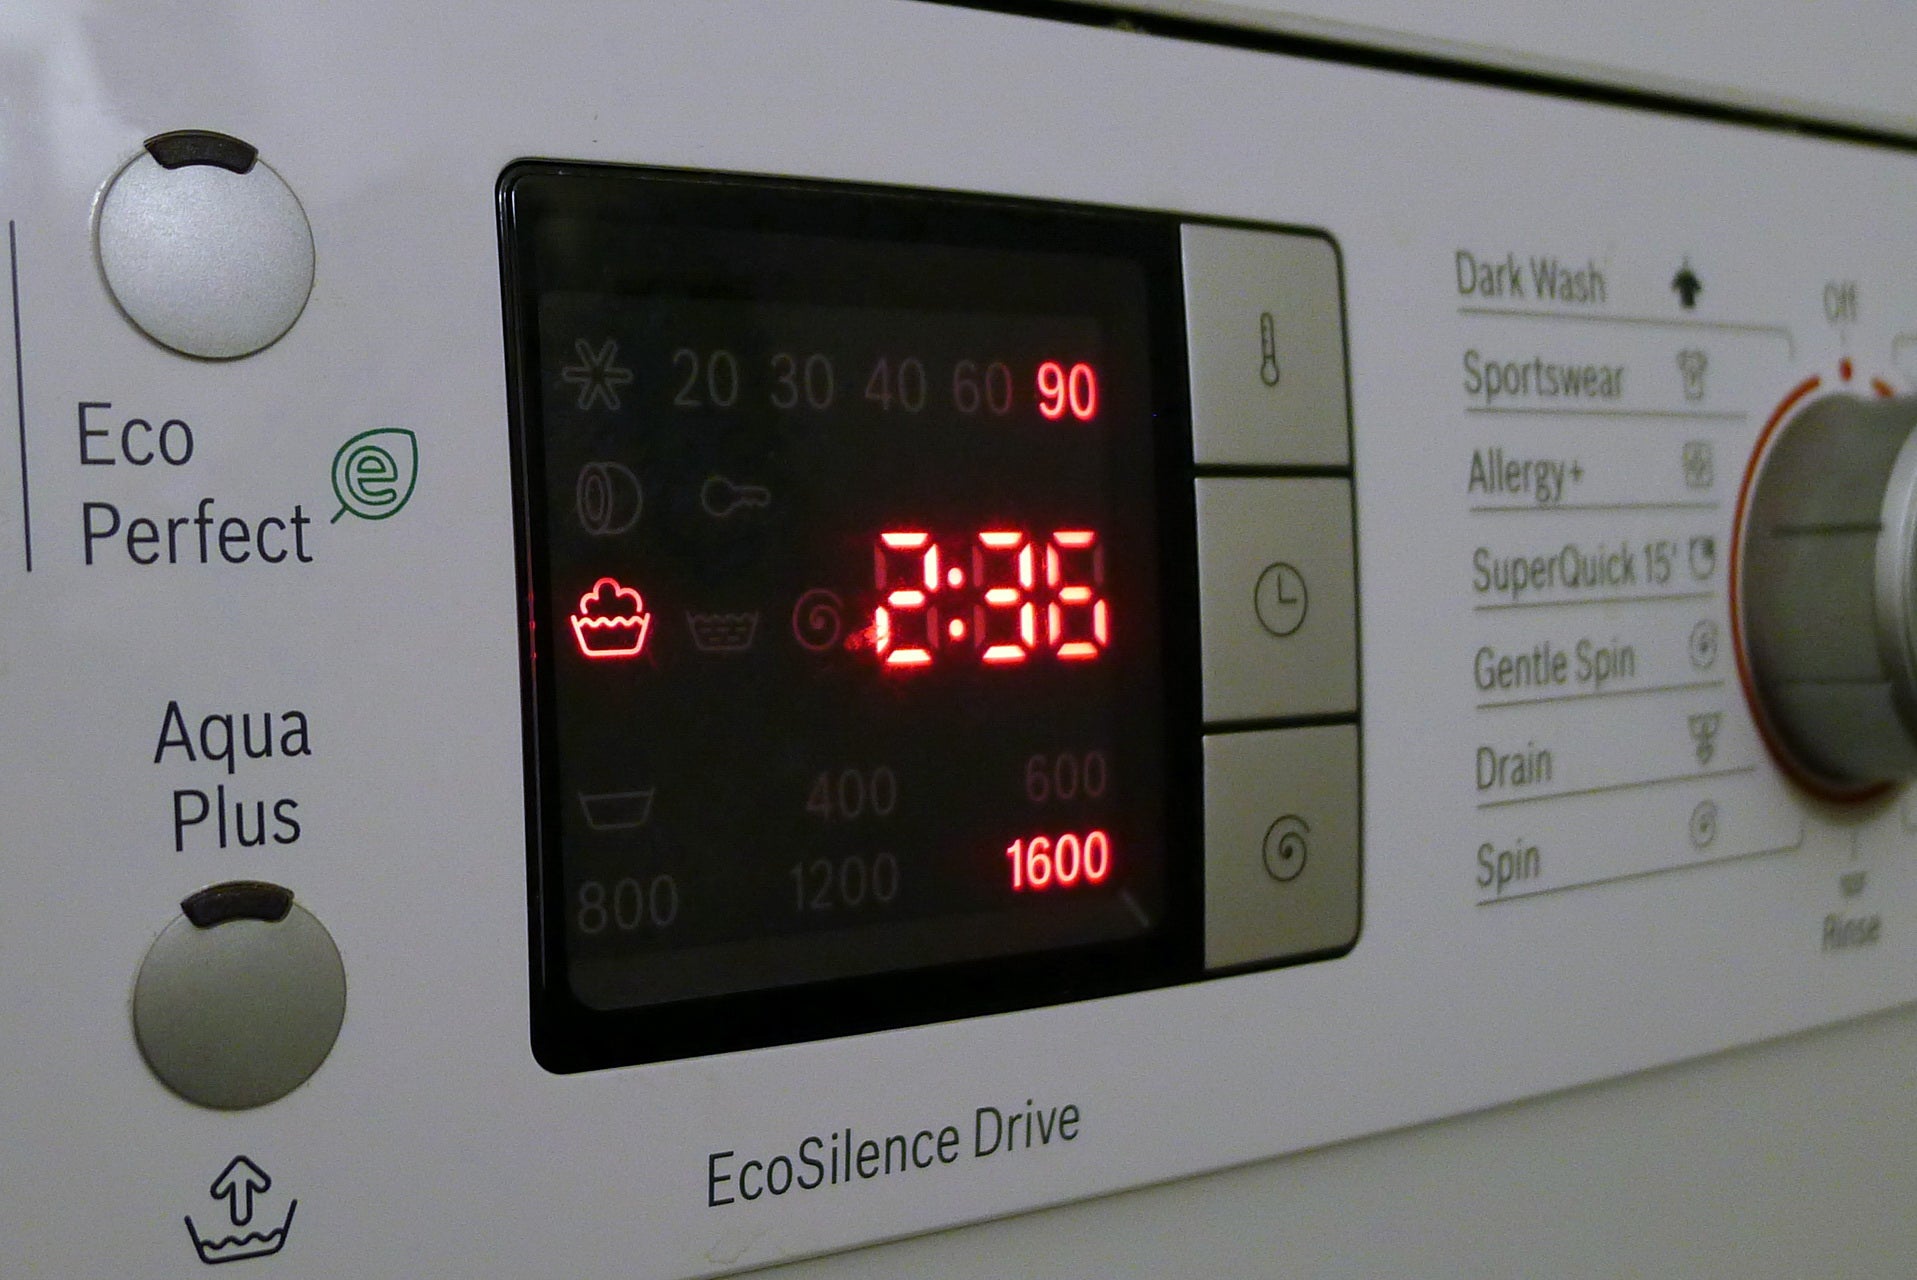 A washing machine control panel showing that it is on a boil wash